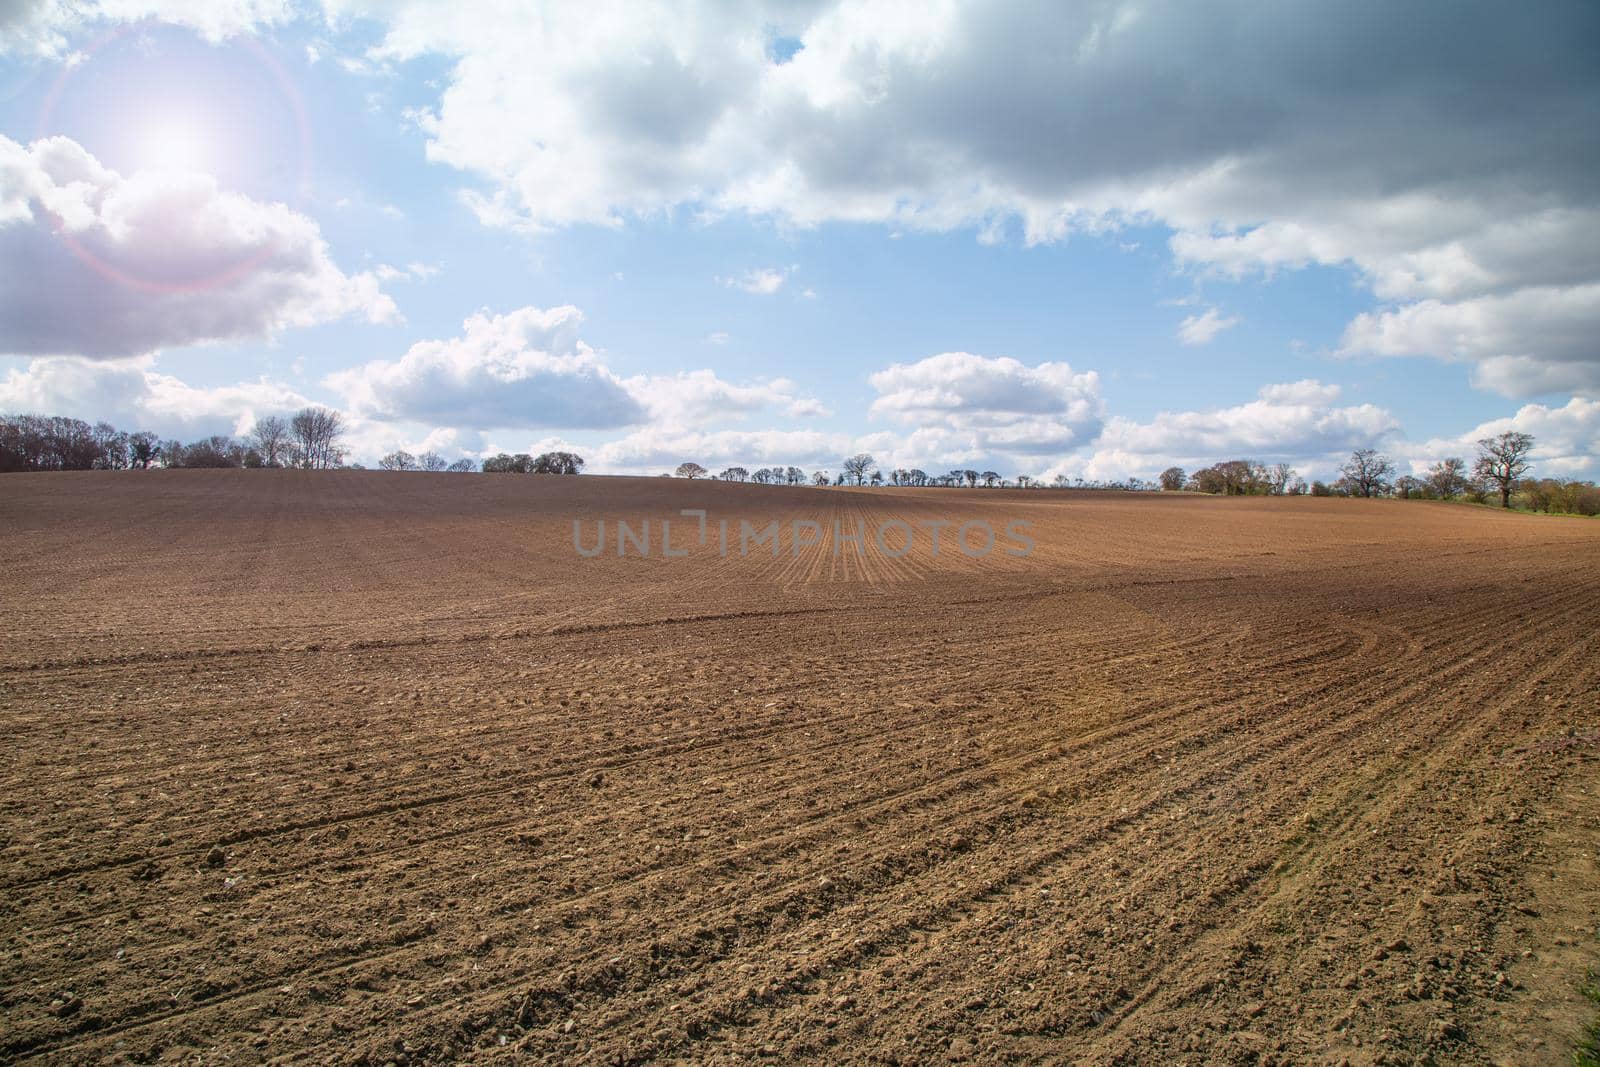 Plowed agricultural spring field during sunny day, by NelliPolk